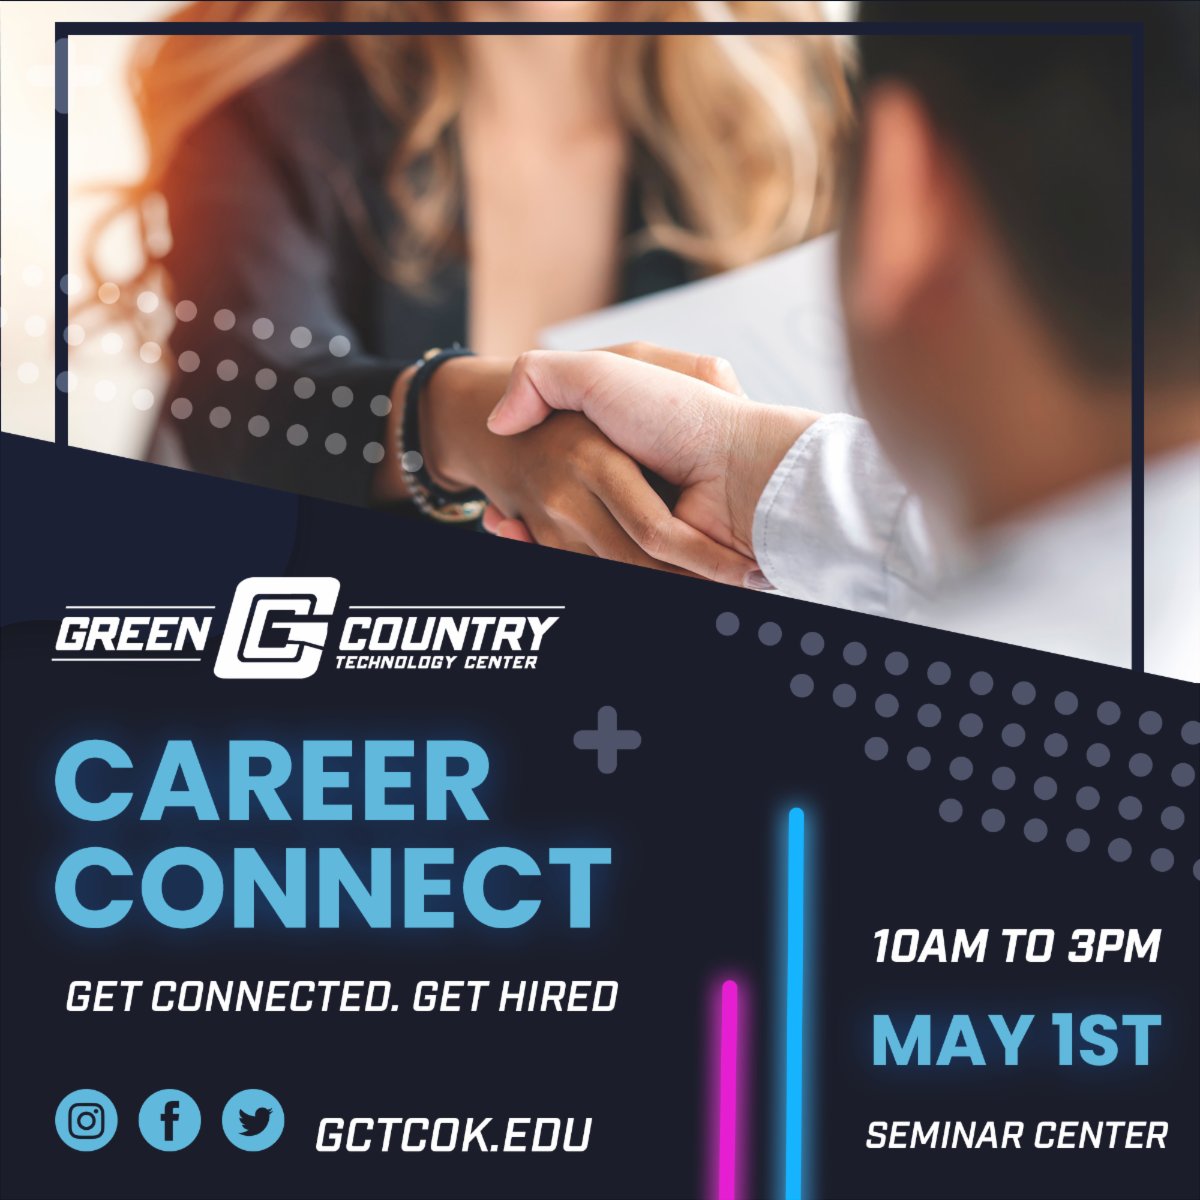 Join us at Career Connect, powered by GCTC! This career fair is open to the public  
conta.cc/3UzGcV6
GET CONNECTED. GET HIRED! 
#GoGreen | #GCTC | #CareerConnect | #Opportunity